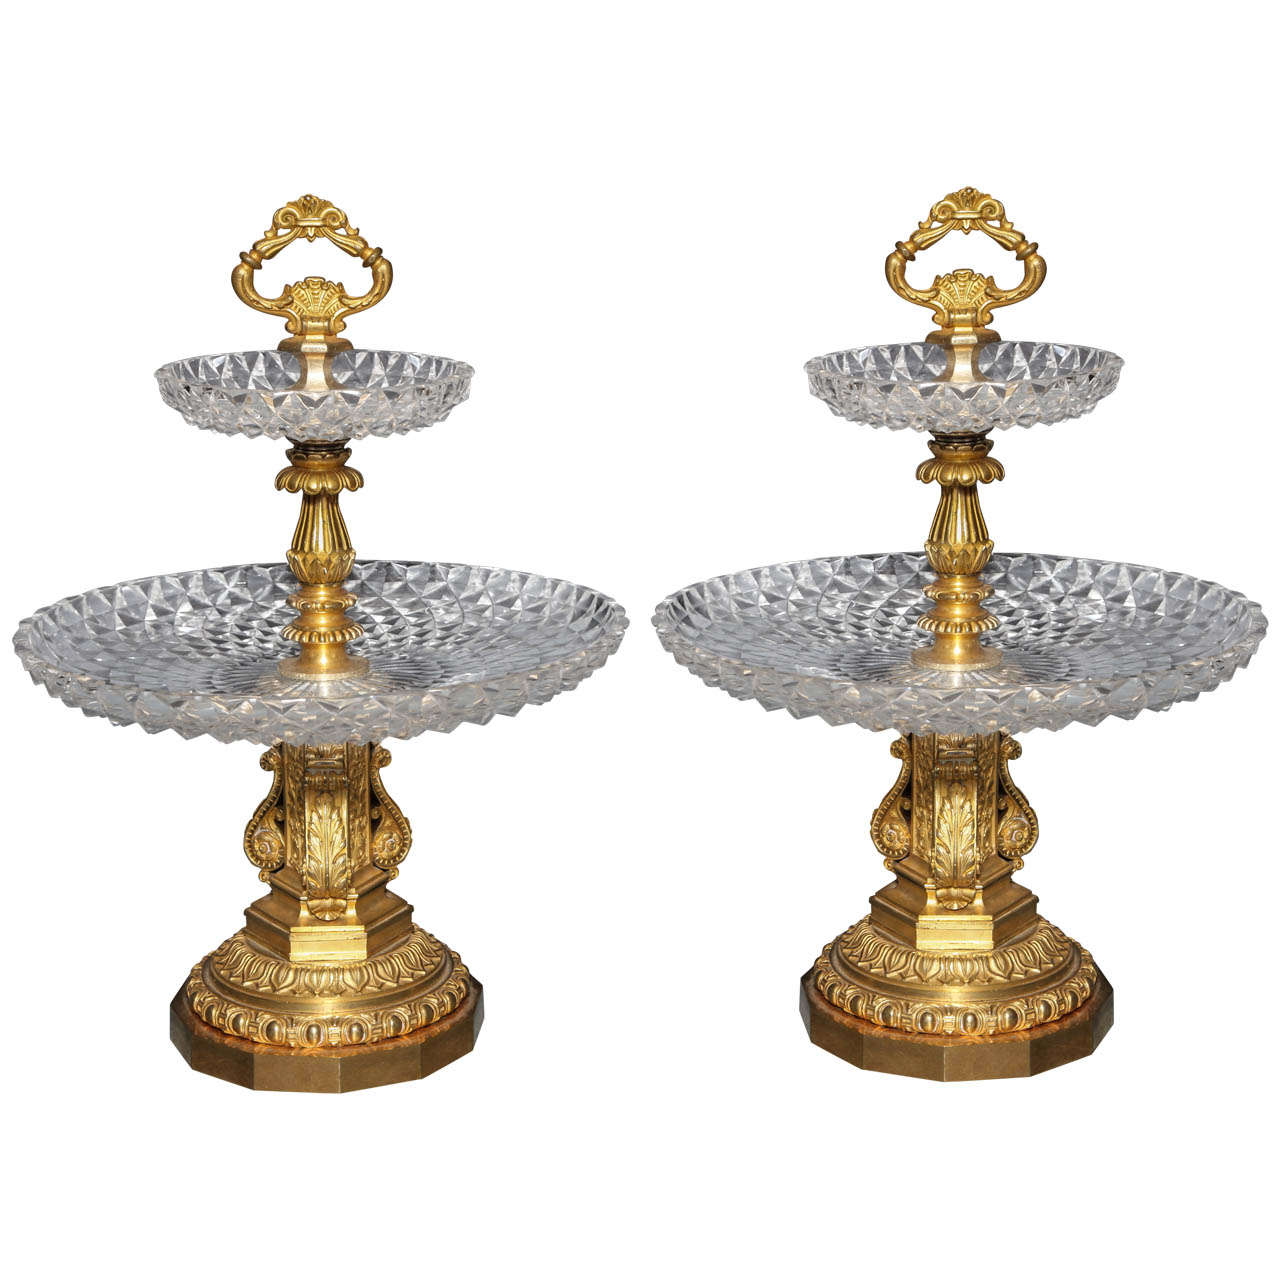 Pair of Antique French Two Tiered Tazzas or Centerpieces by P. Philippe Thomier